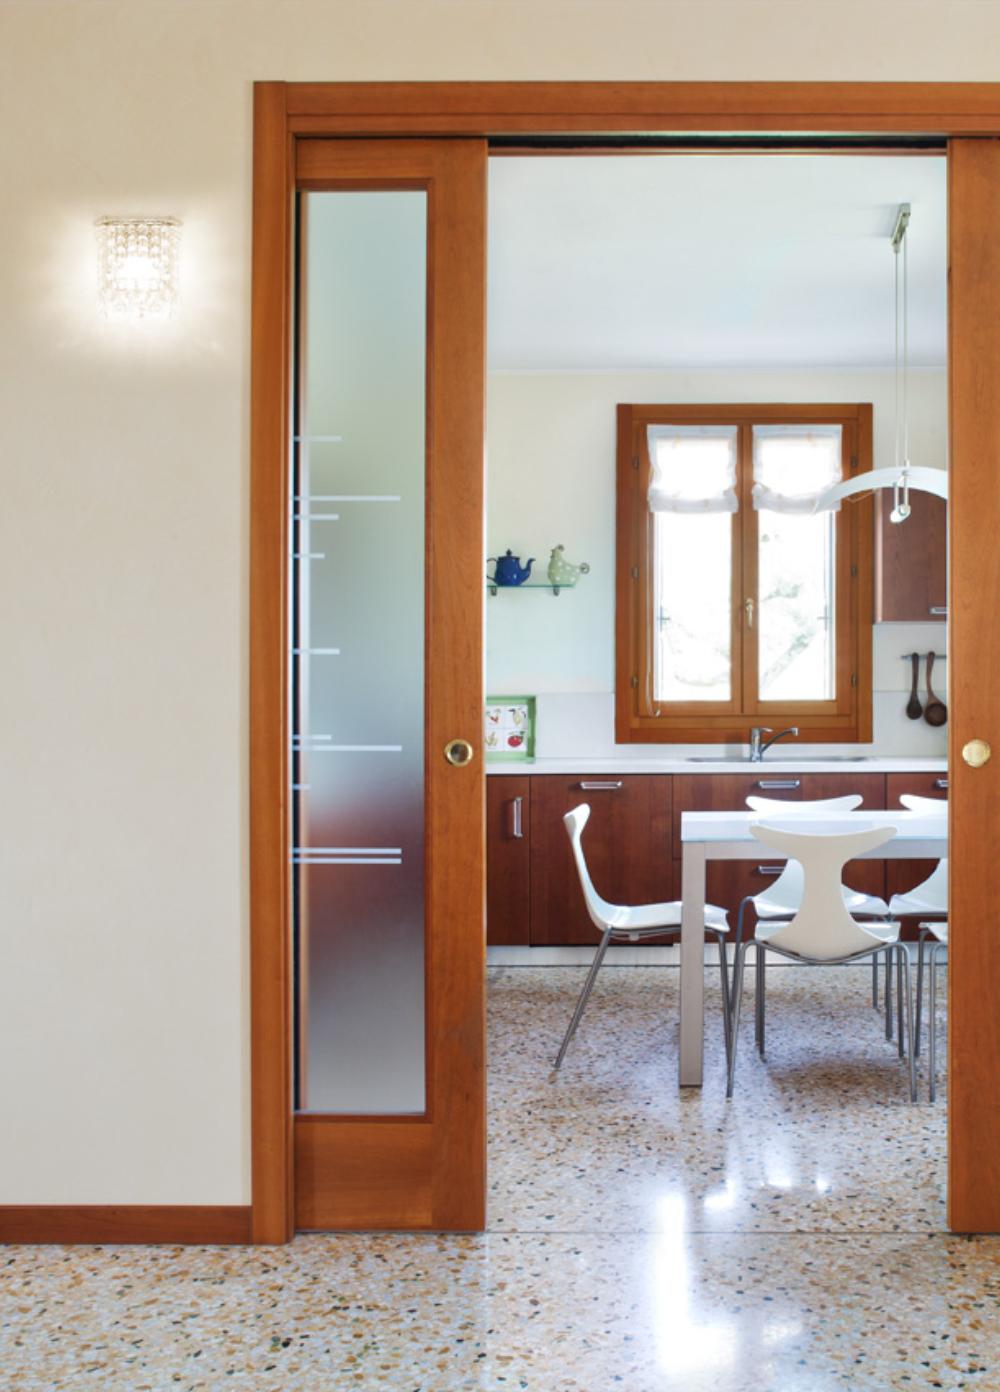 Classic sliding wooden interior door disappeared in tanganica with glass